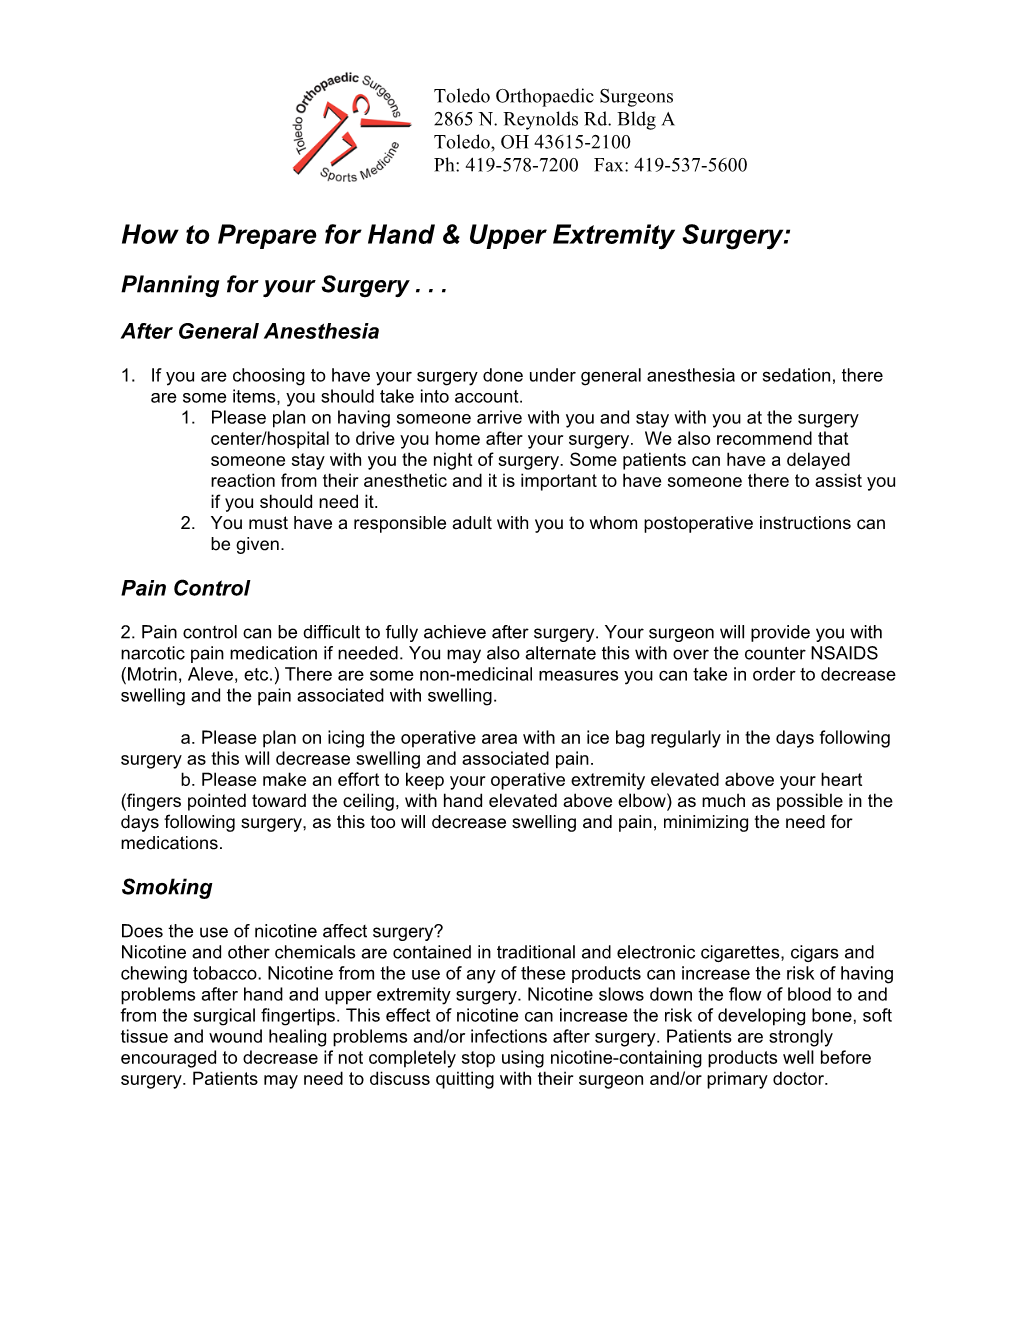 How to Prepare for Hand & Upper Extremity Surgery